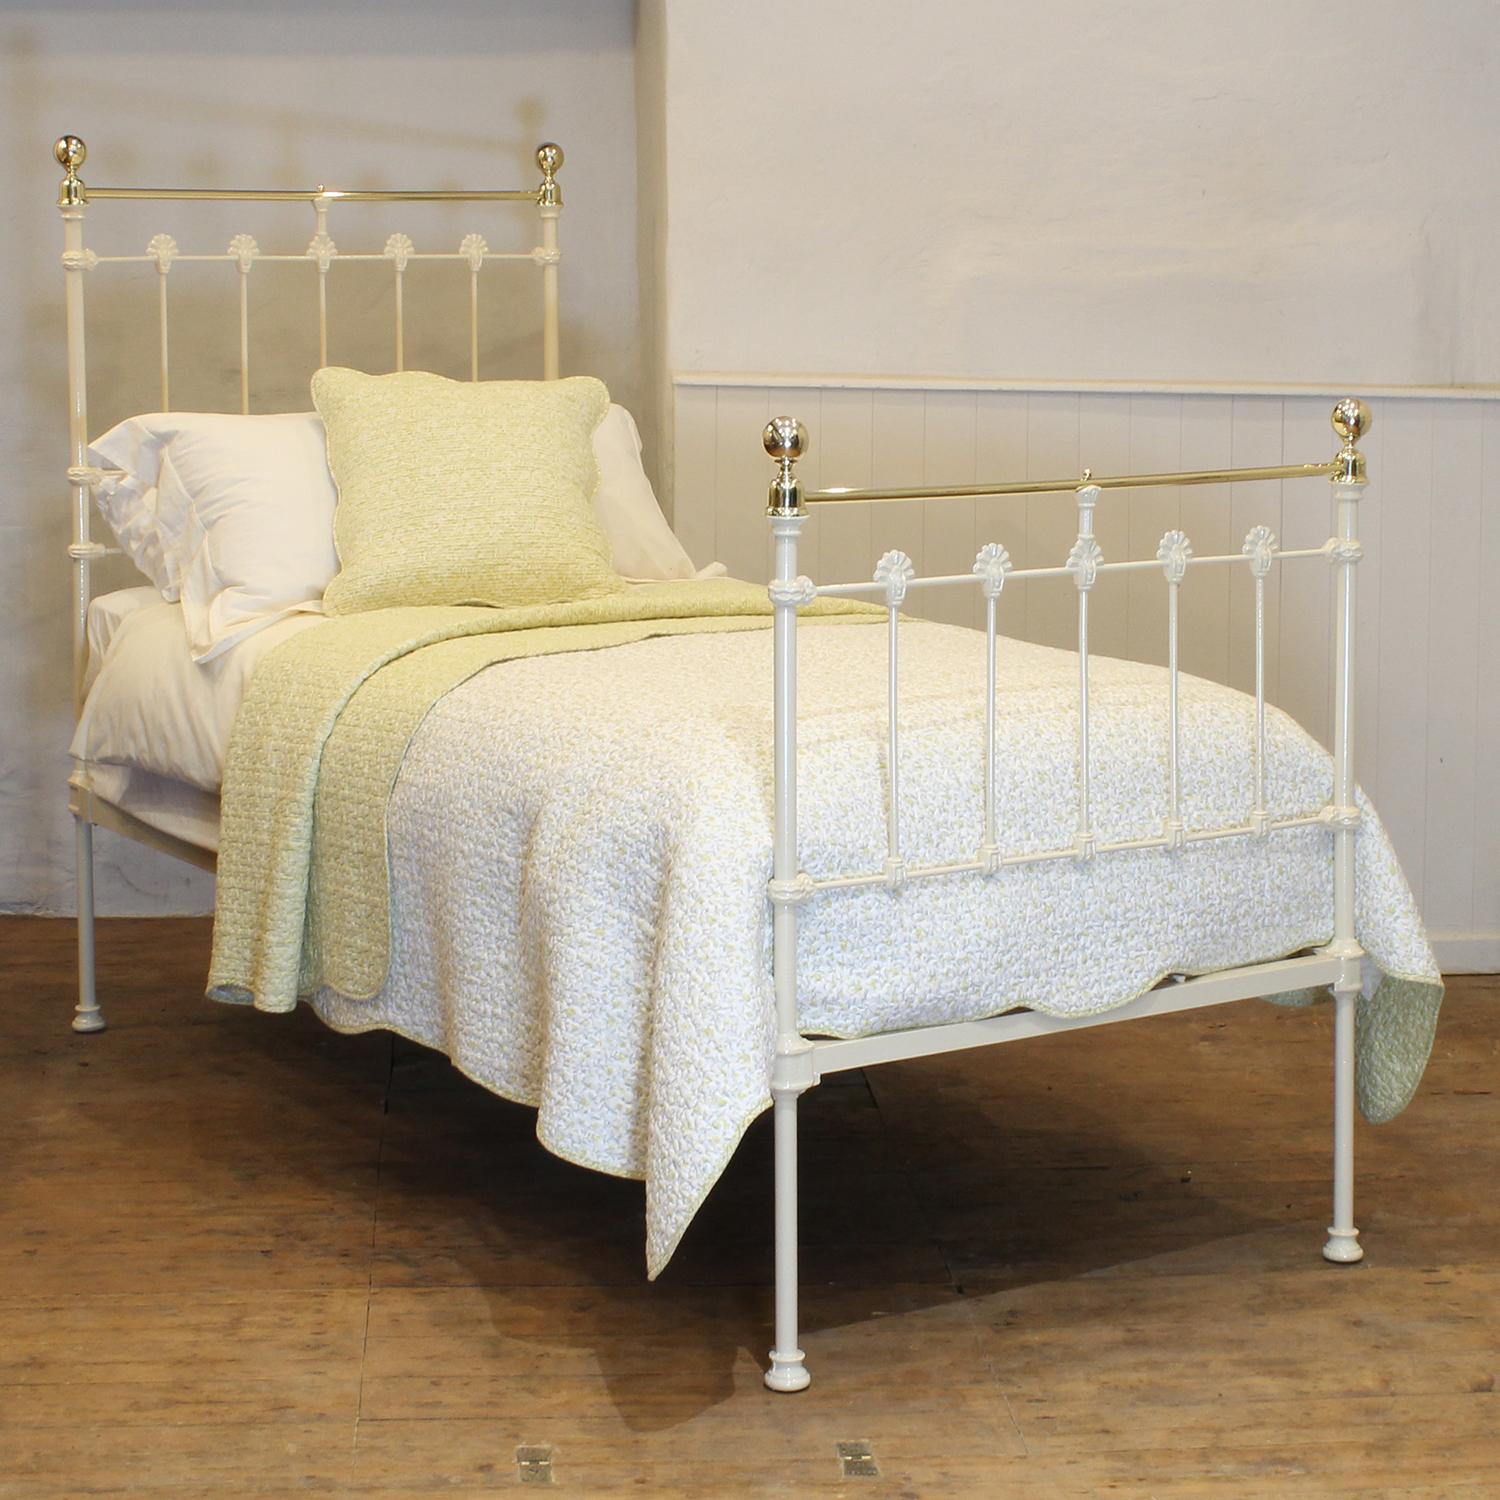 A traditional single Victorian brass and iron antique bed in cream, with straight brass top rail, brass collars and round knobs.
This fine original antique bed from the late Victorian era has attractive castings,.
This bed takes a standard UK single